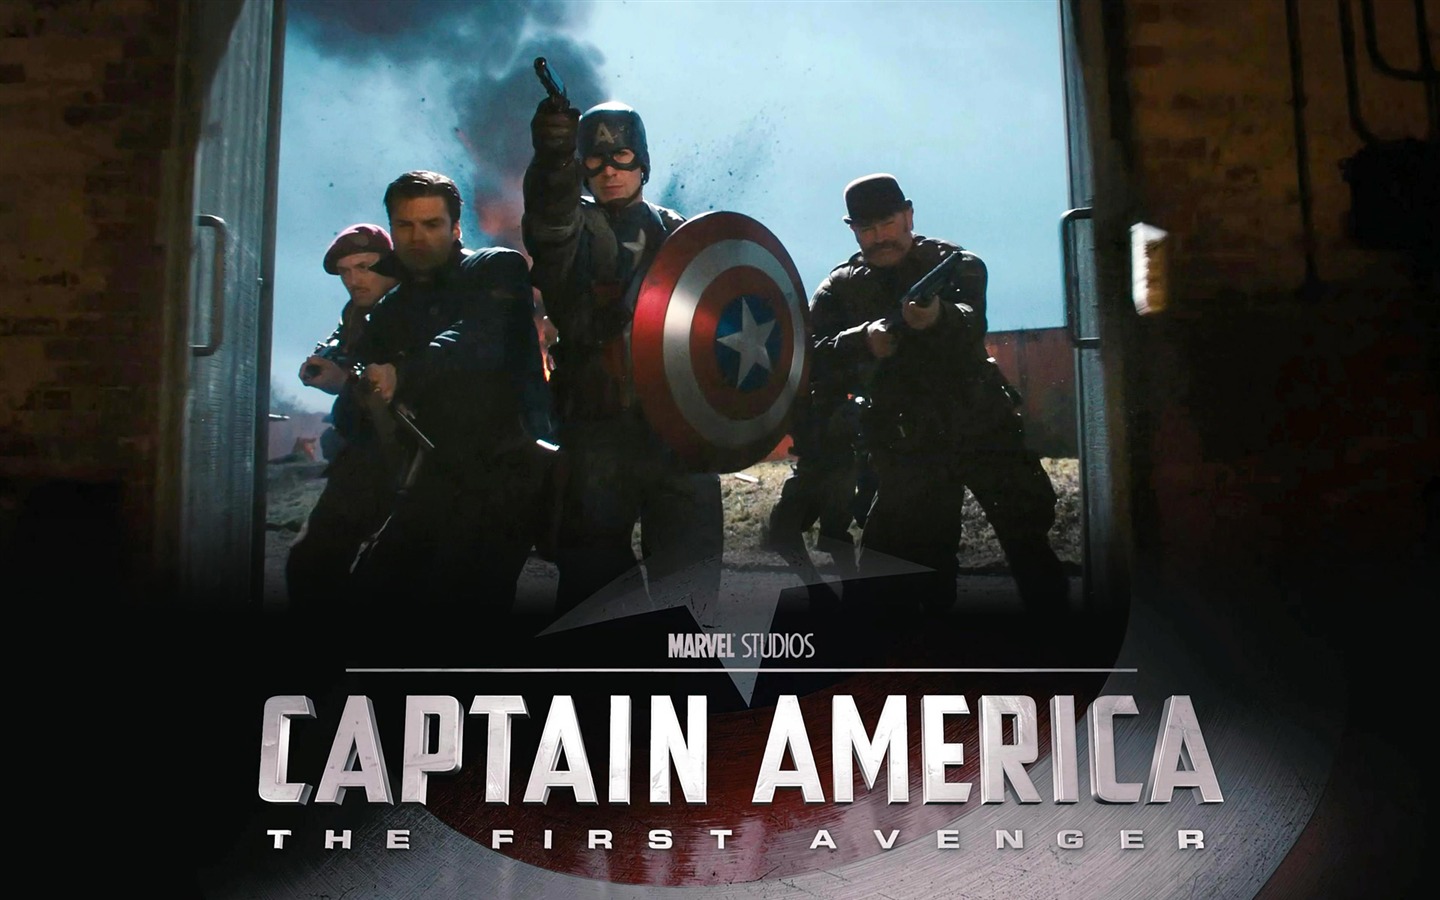 Captain America: The First Avenger wallpapers HD #9 - 1440x900